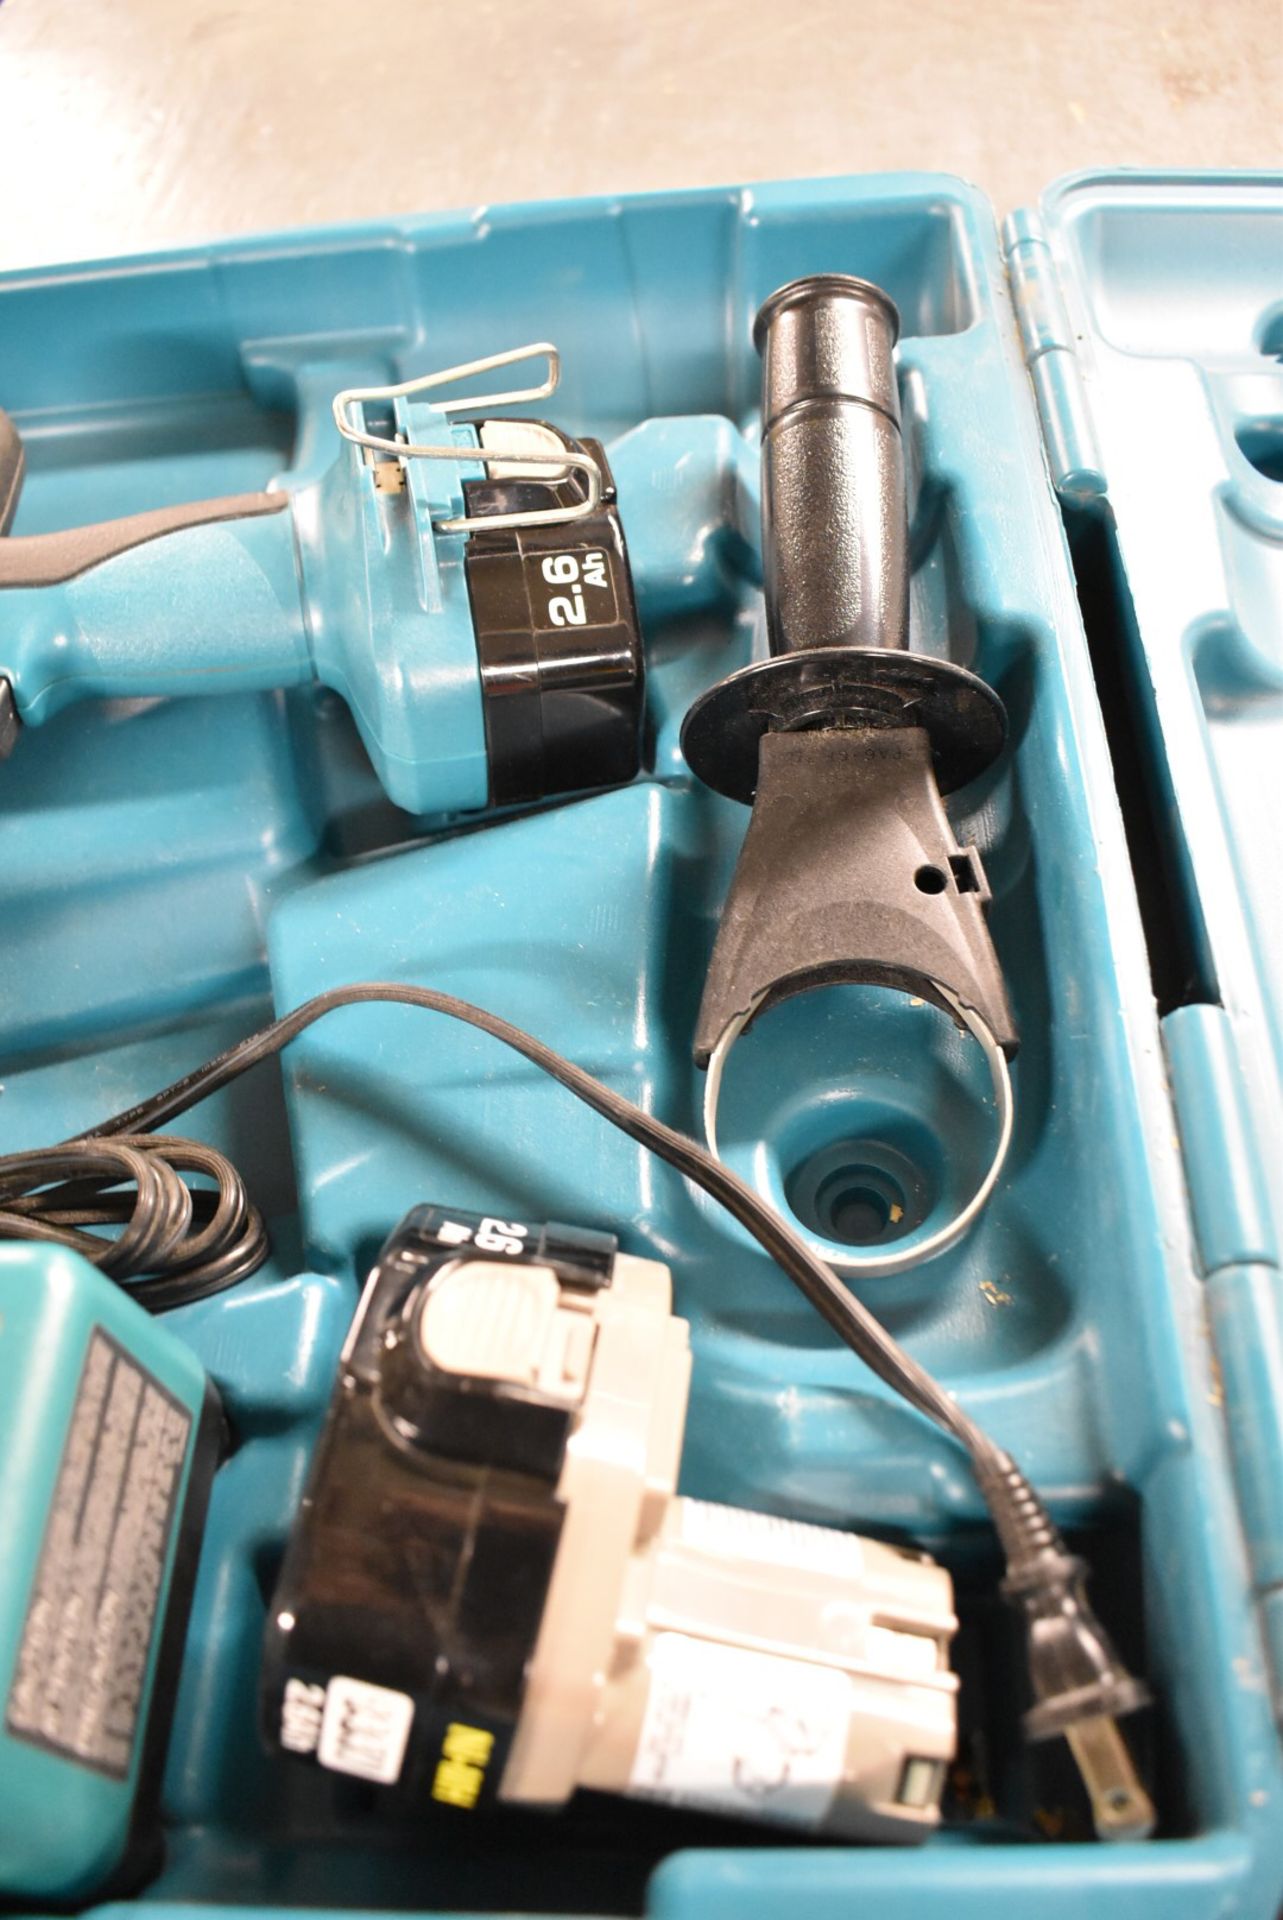 MAKITA 14.4V CORDLESS DRILL SET [RIGGING FEES FOR LOT #2665 - $25 USD PLUS APPLICABLE TAXES] - Image 3 of 4